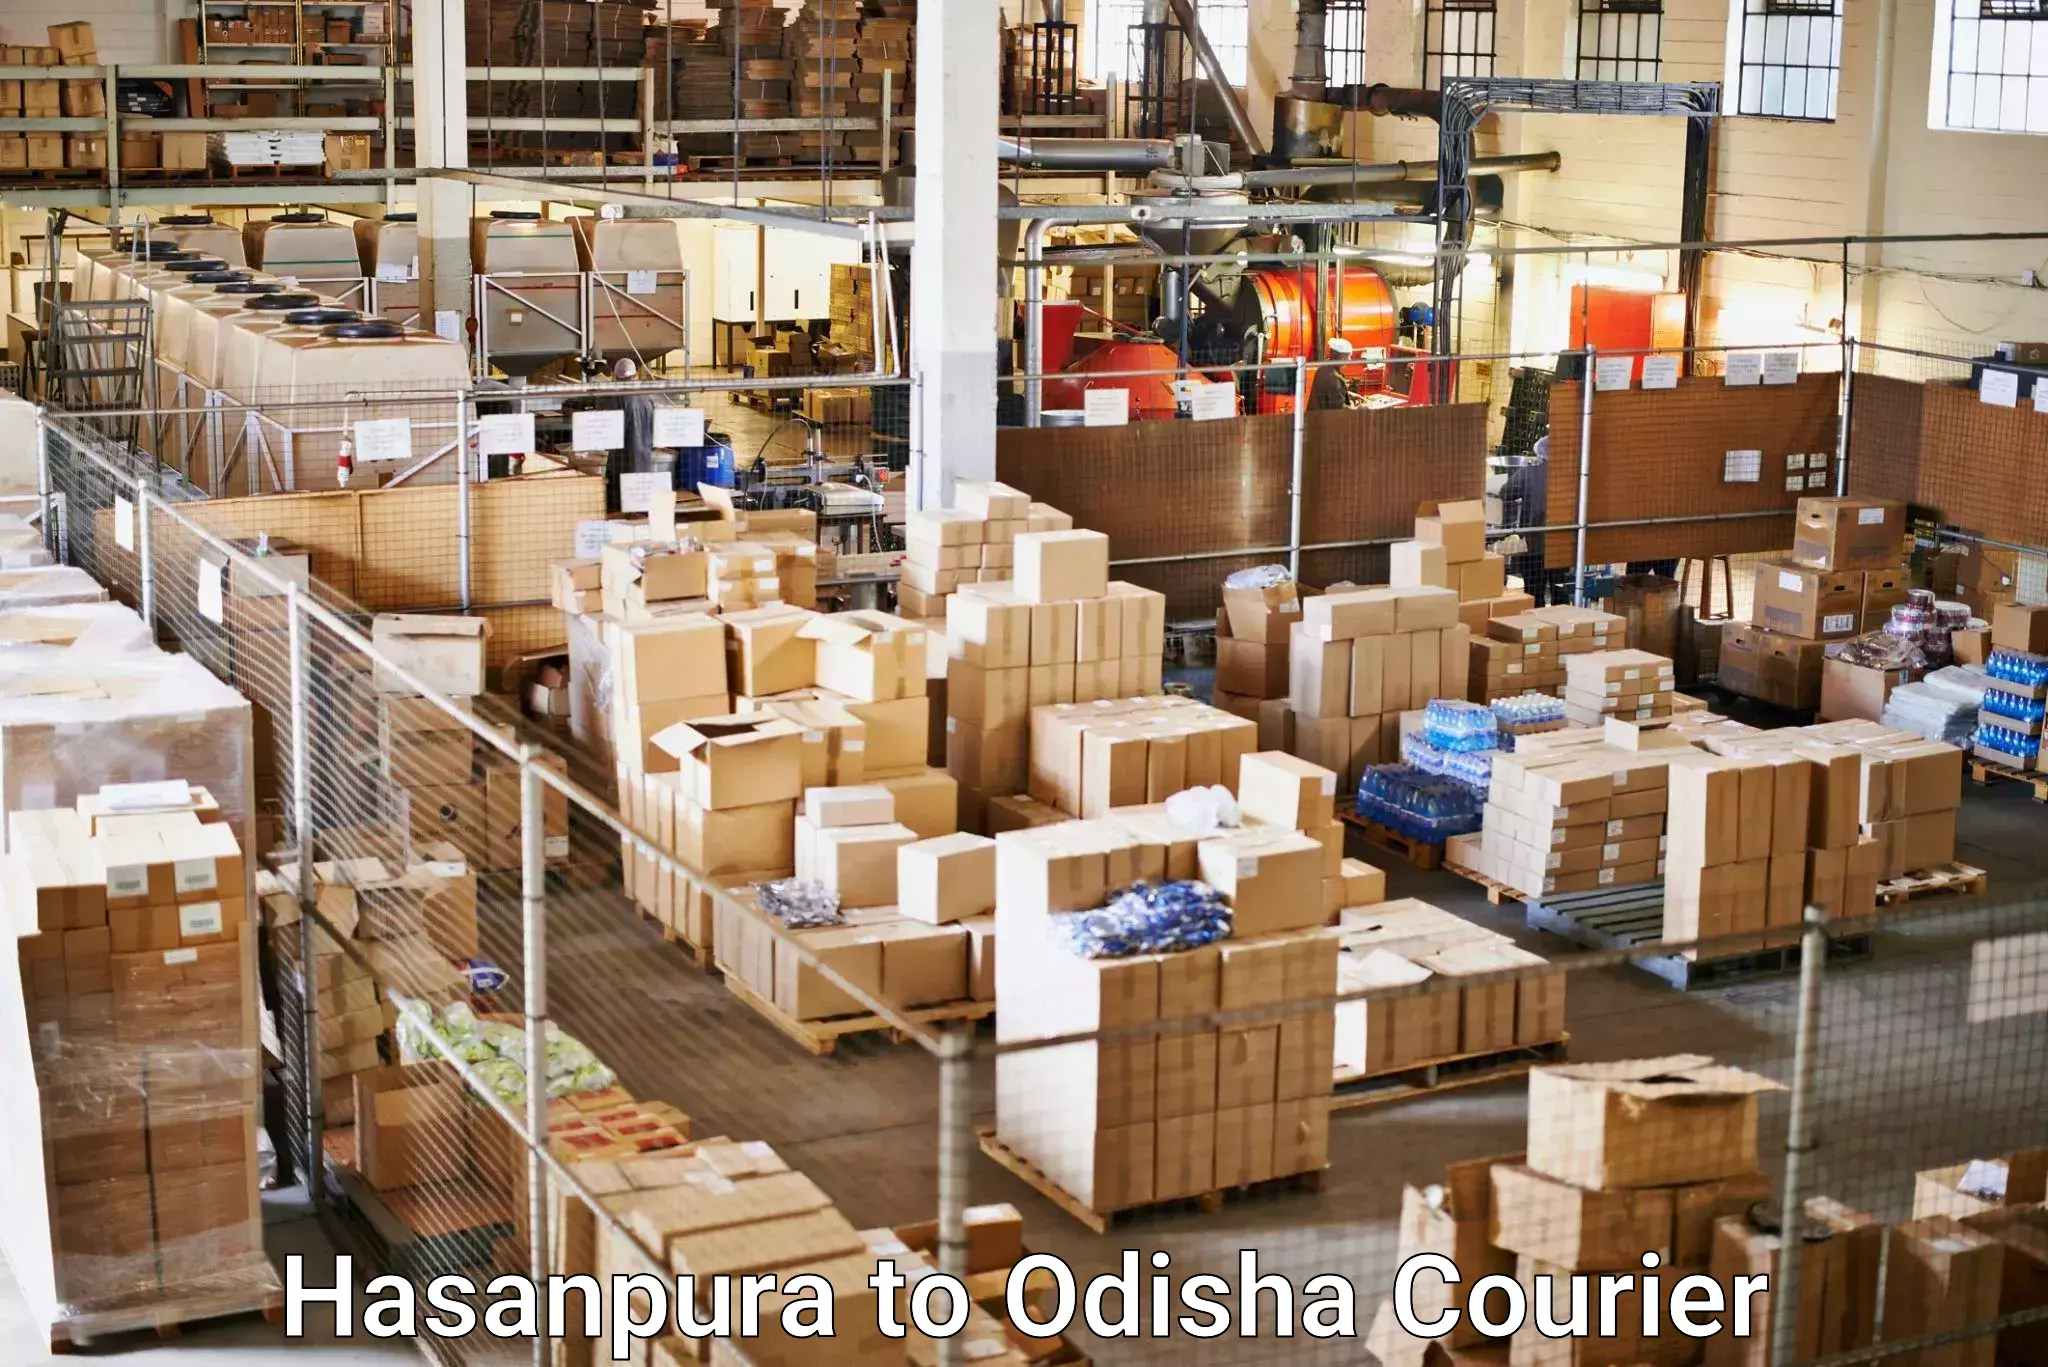 Same-day delivery solutions Hasanpura to Agarpada